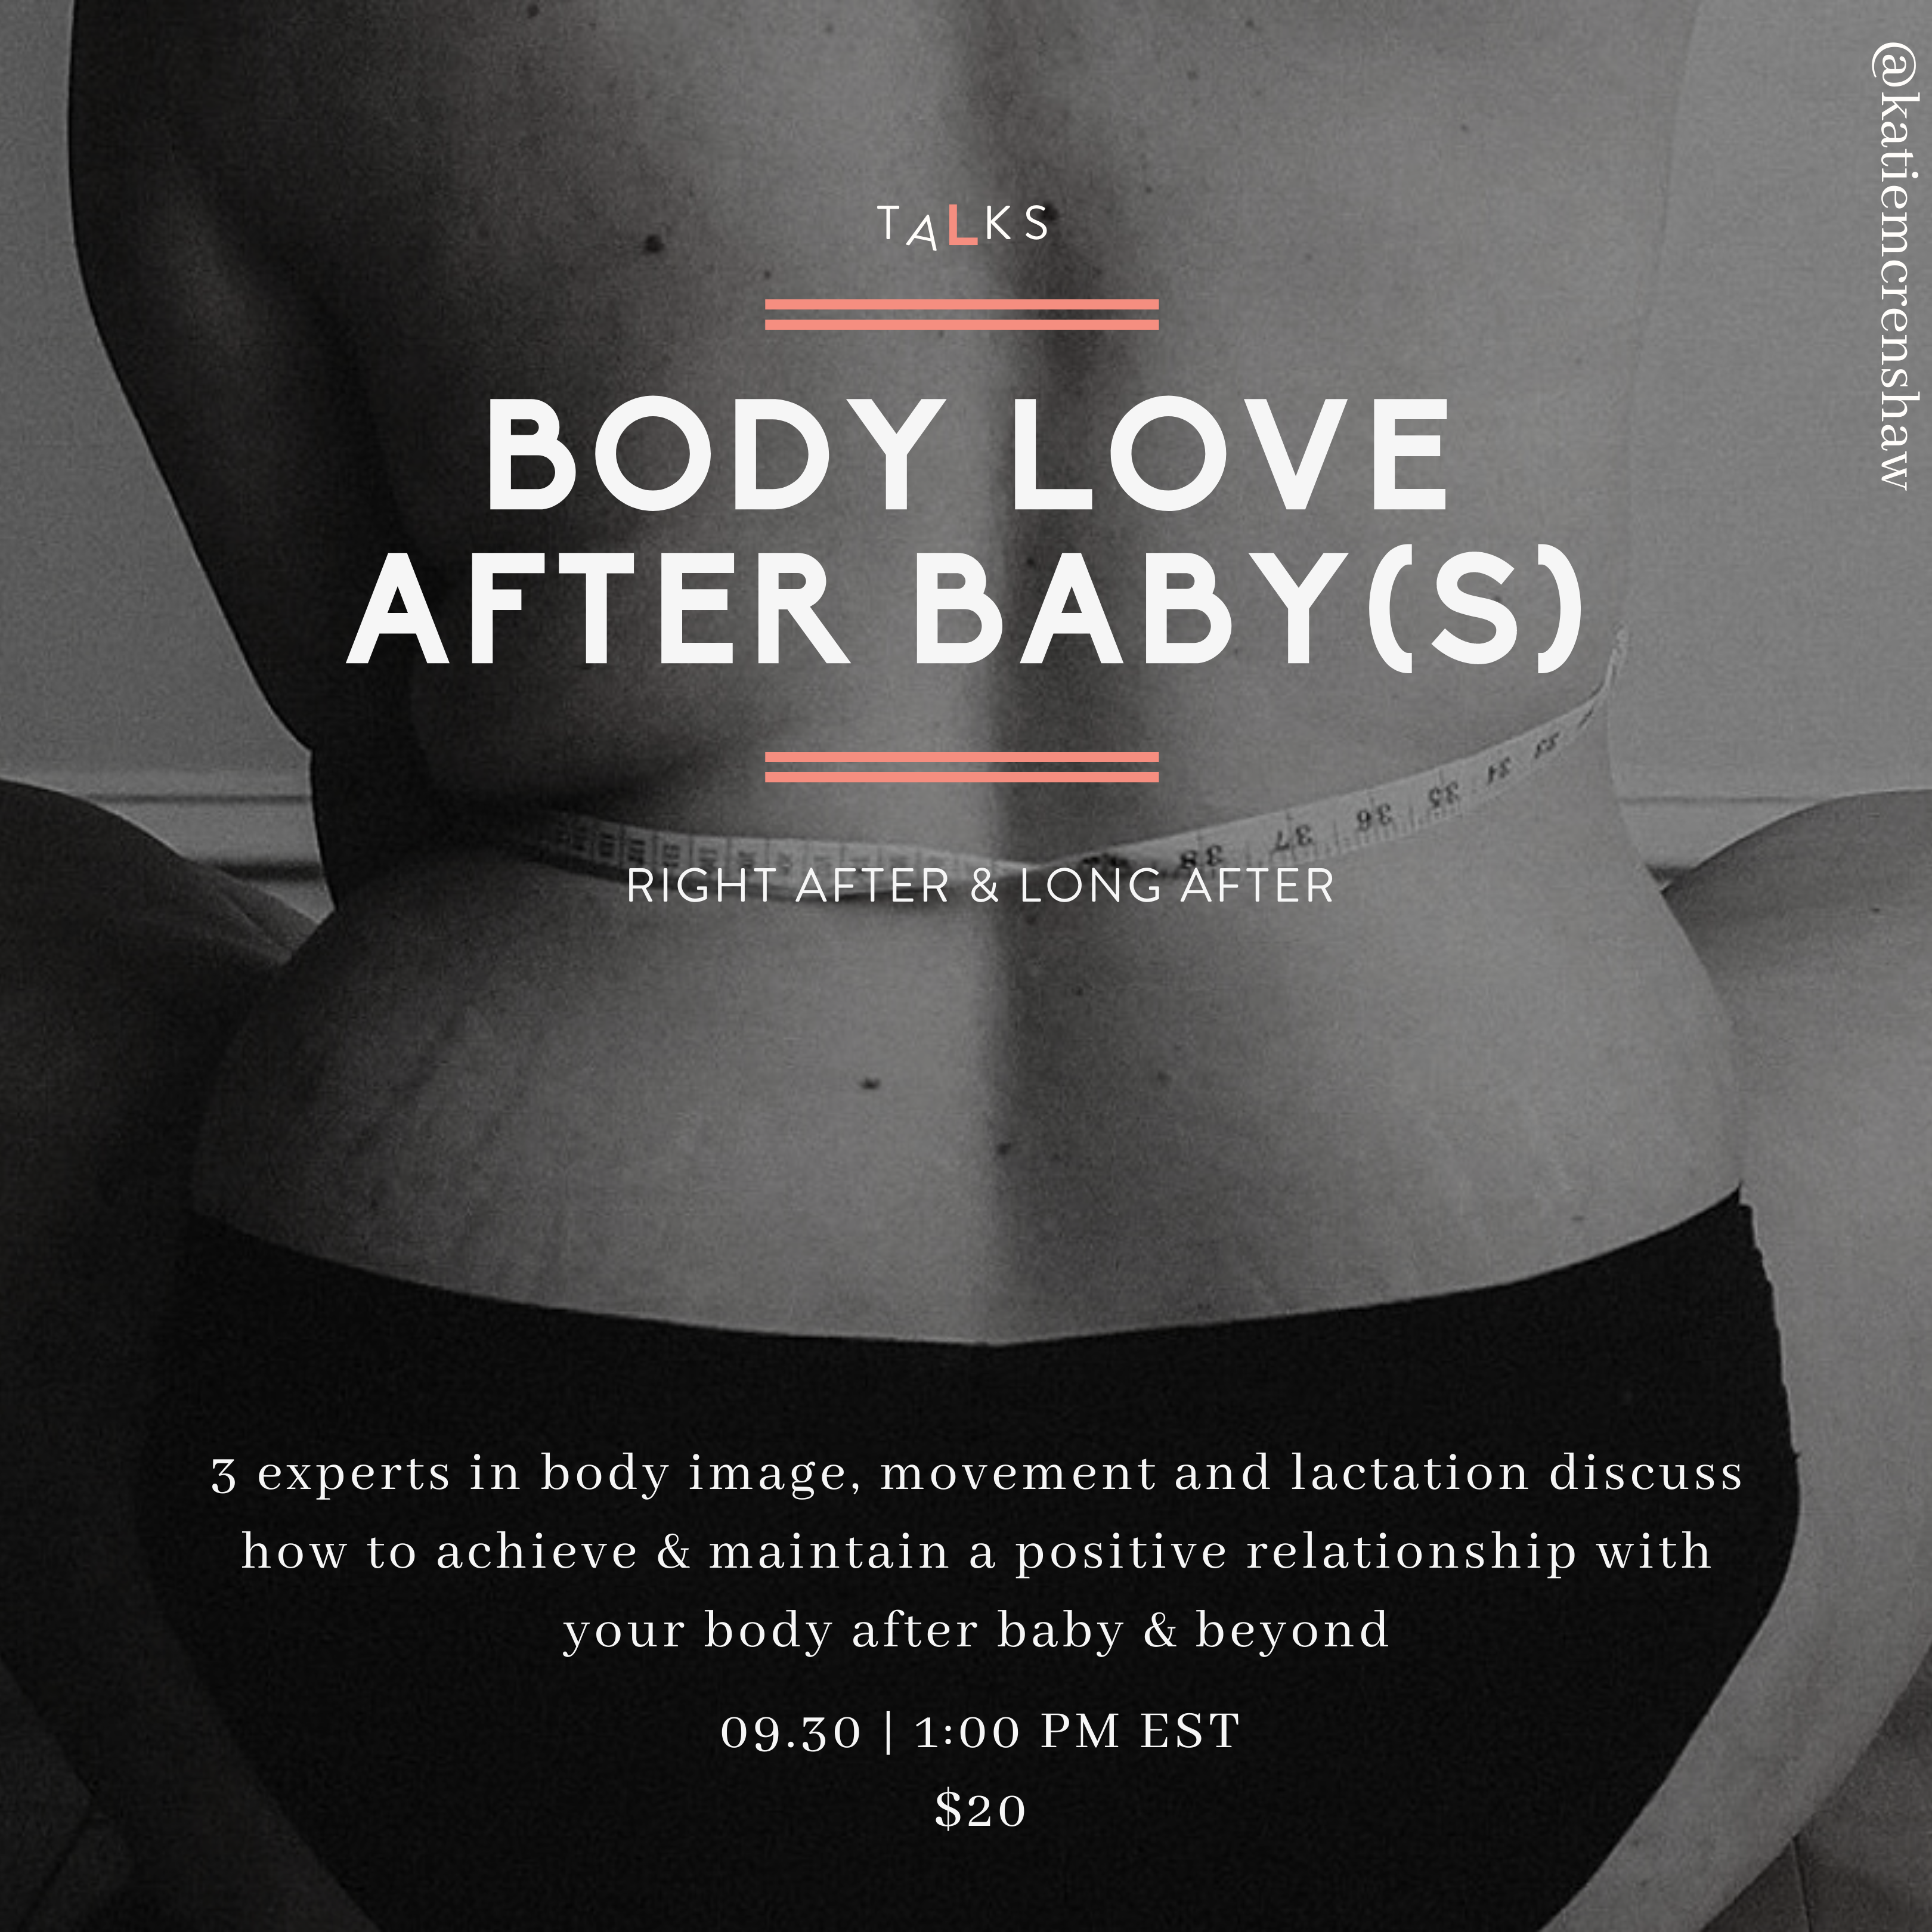 Body Love After Baby(s): On Demand